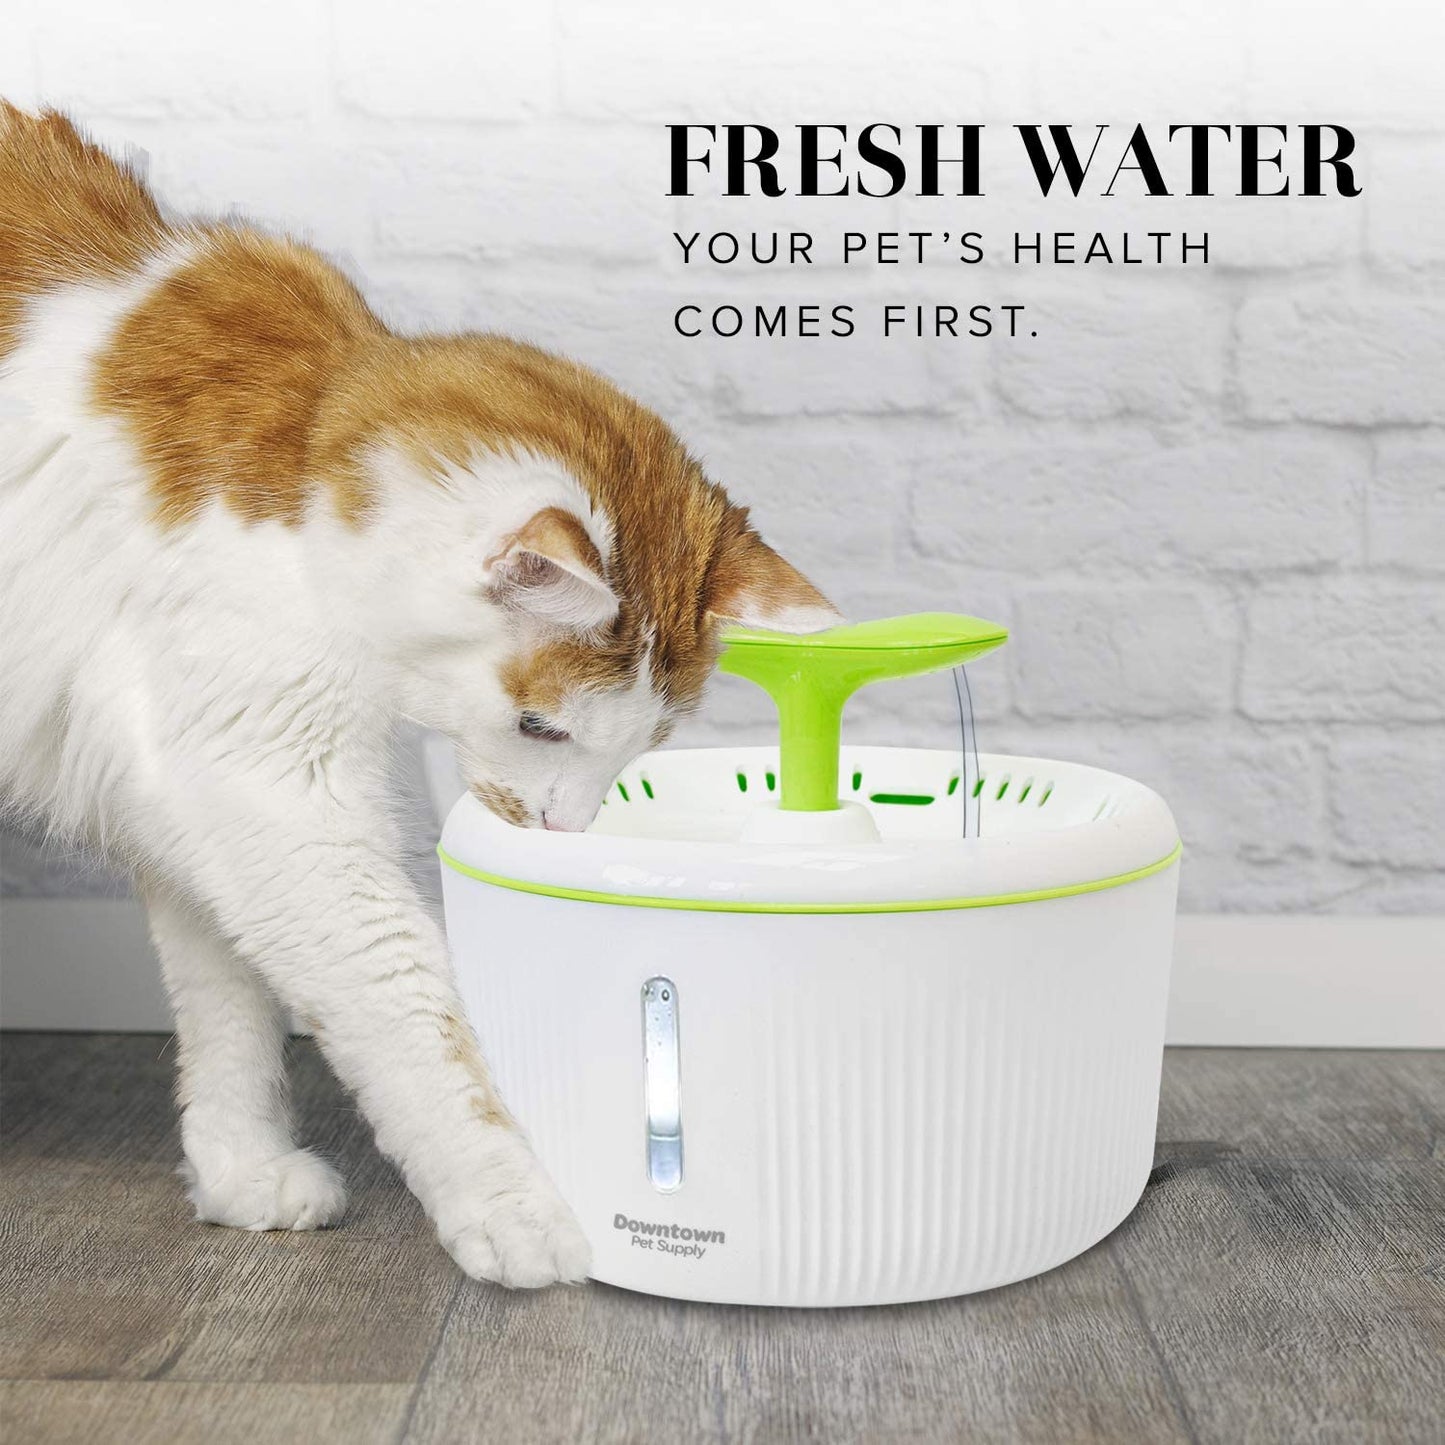 Dog Cat Automatic Pet Drinking Fountain, Ultra Quiet Water Dispenser Dual Nozzle Options with Filter Included for Cats and Dogs